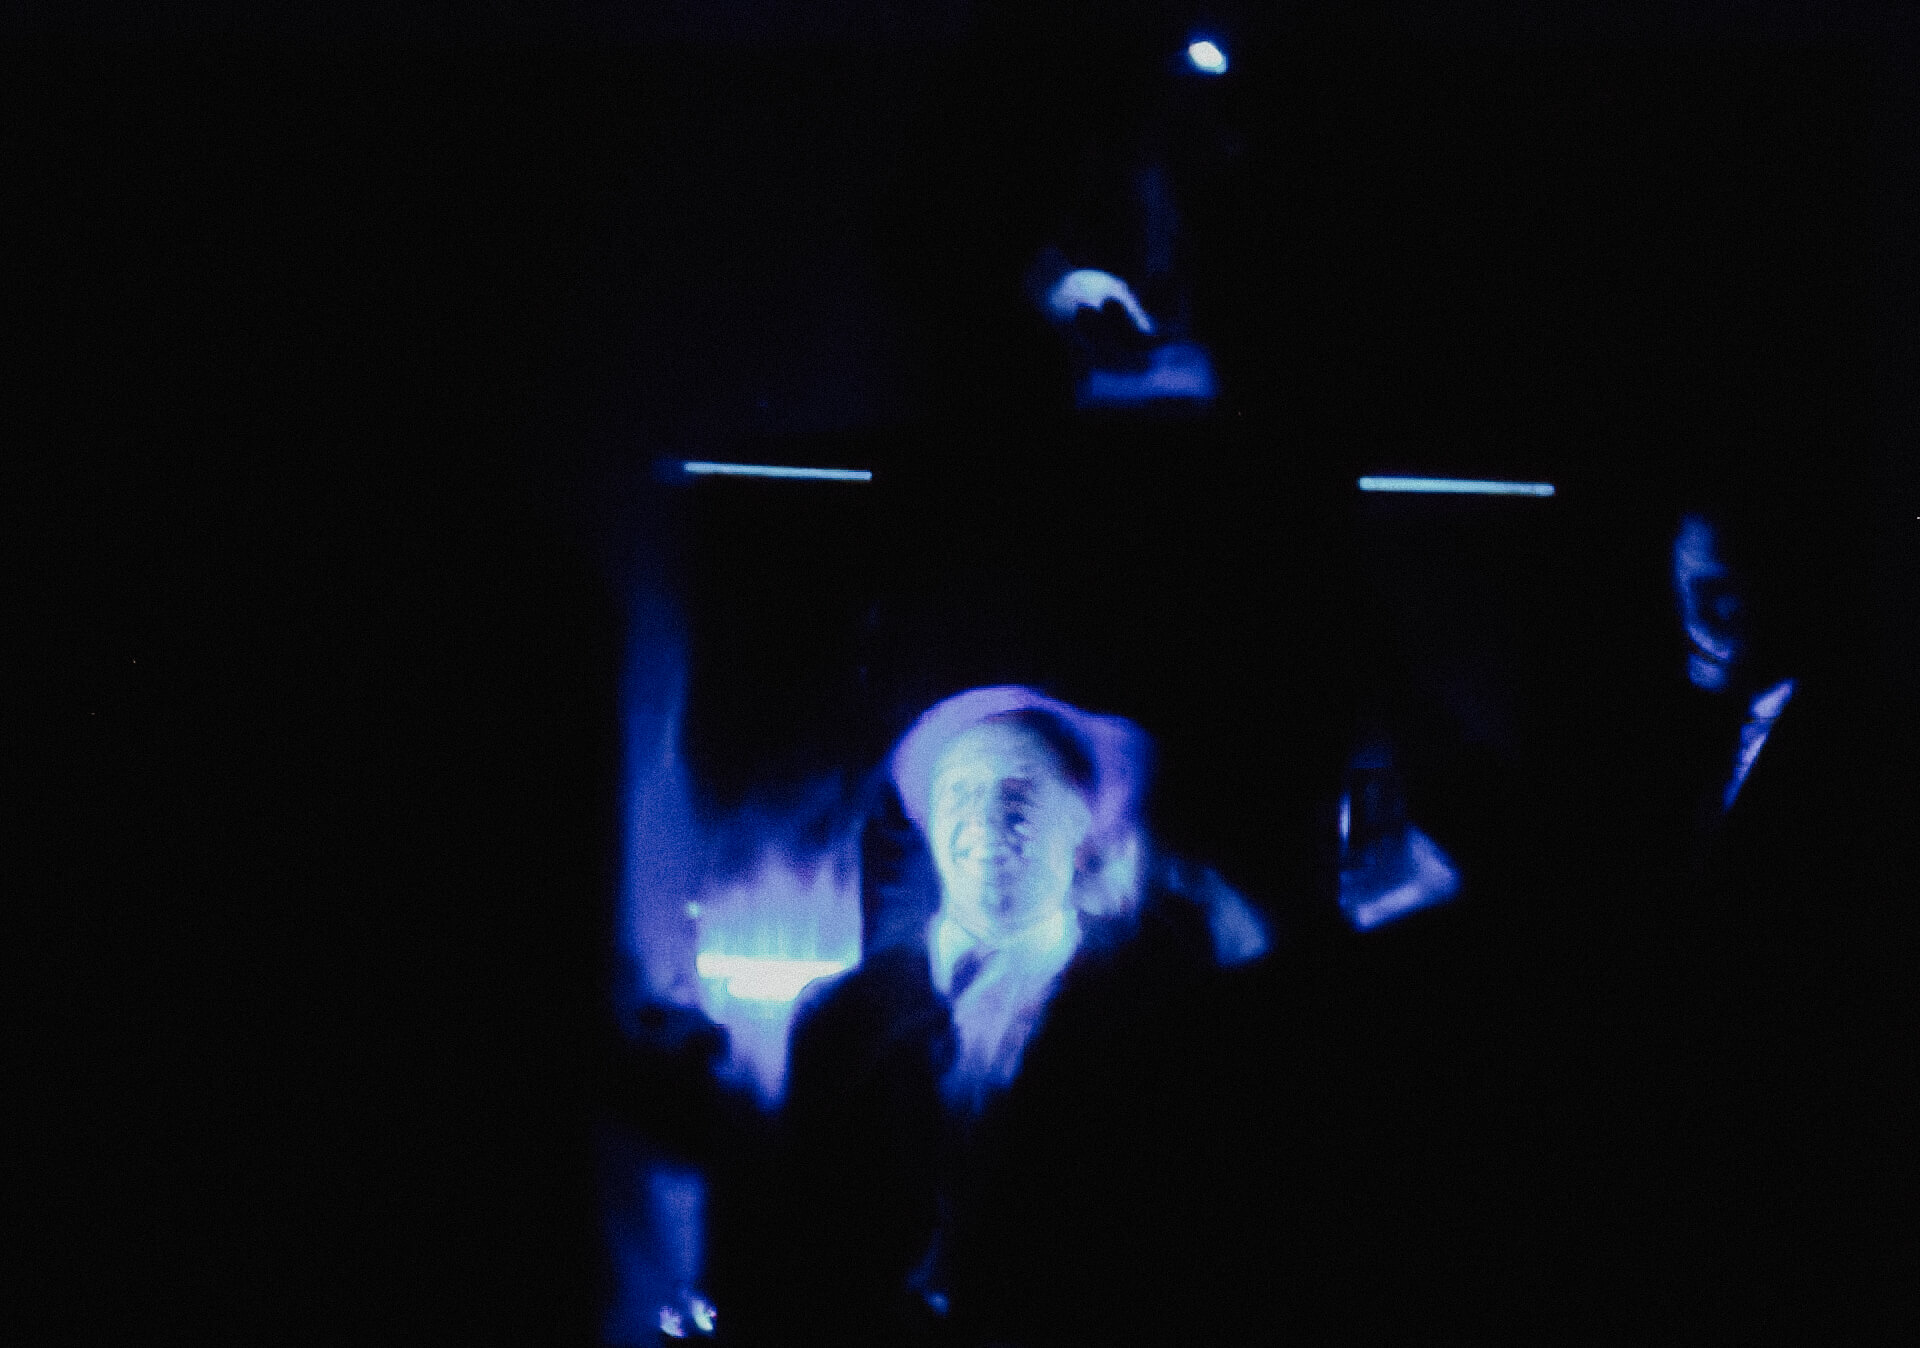 Blurry image of a person smiling. Dimmed blue light is laid on this person